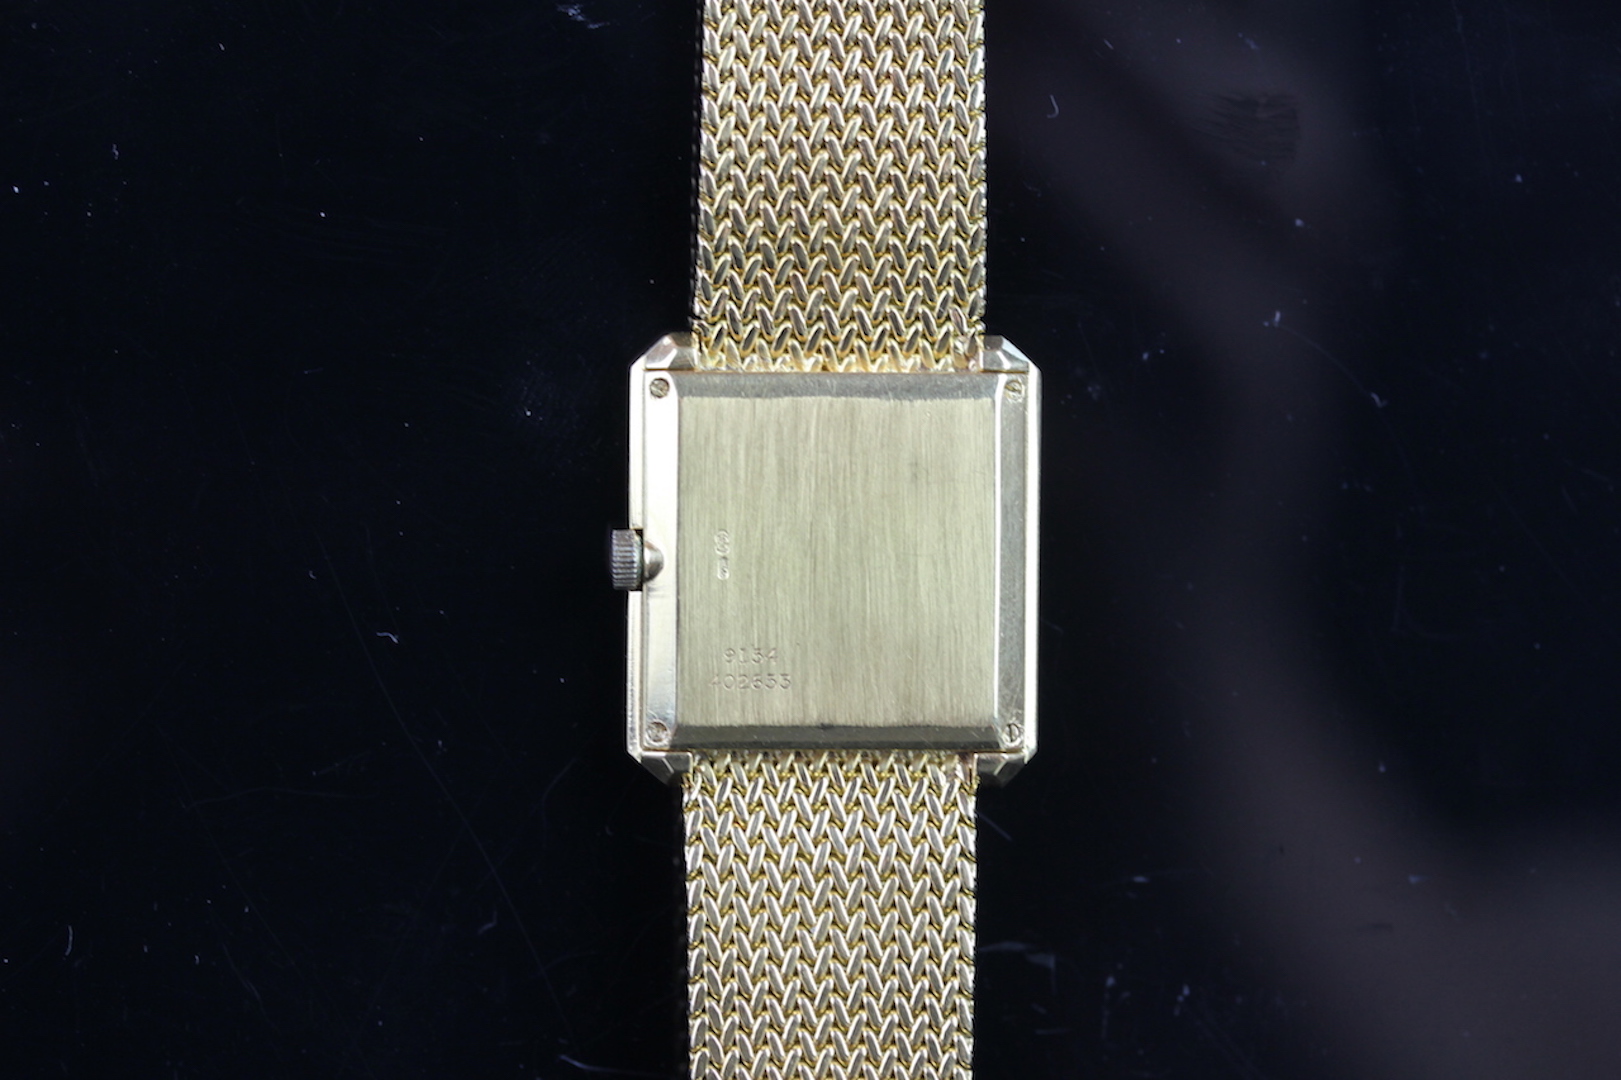 GENTLEMEN'S 18K GOLD PIAGET PROTOCOL, REF. 9154, WITH BRACELET, VINTAGE MANUALLY WOUND WRISTWATCH, - Image 3 of 5